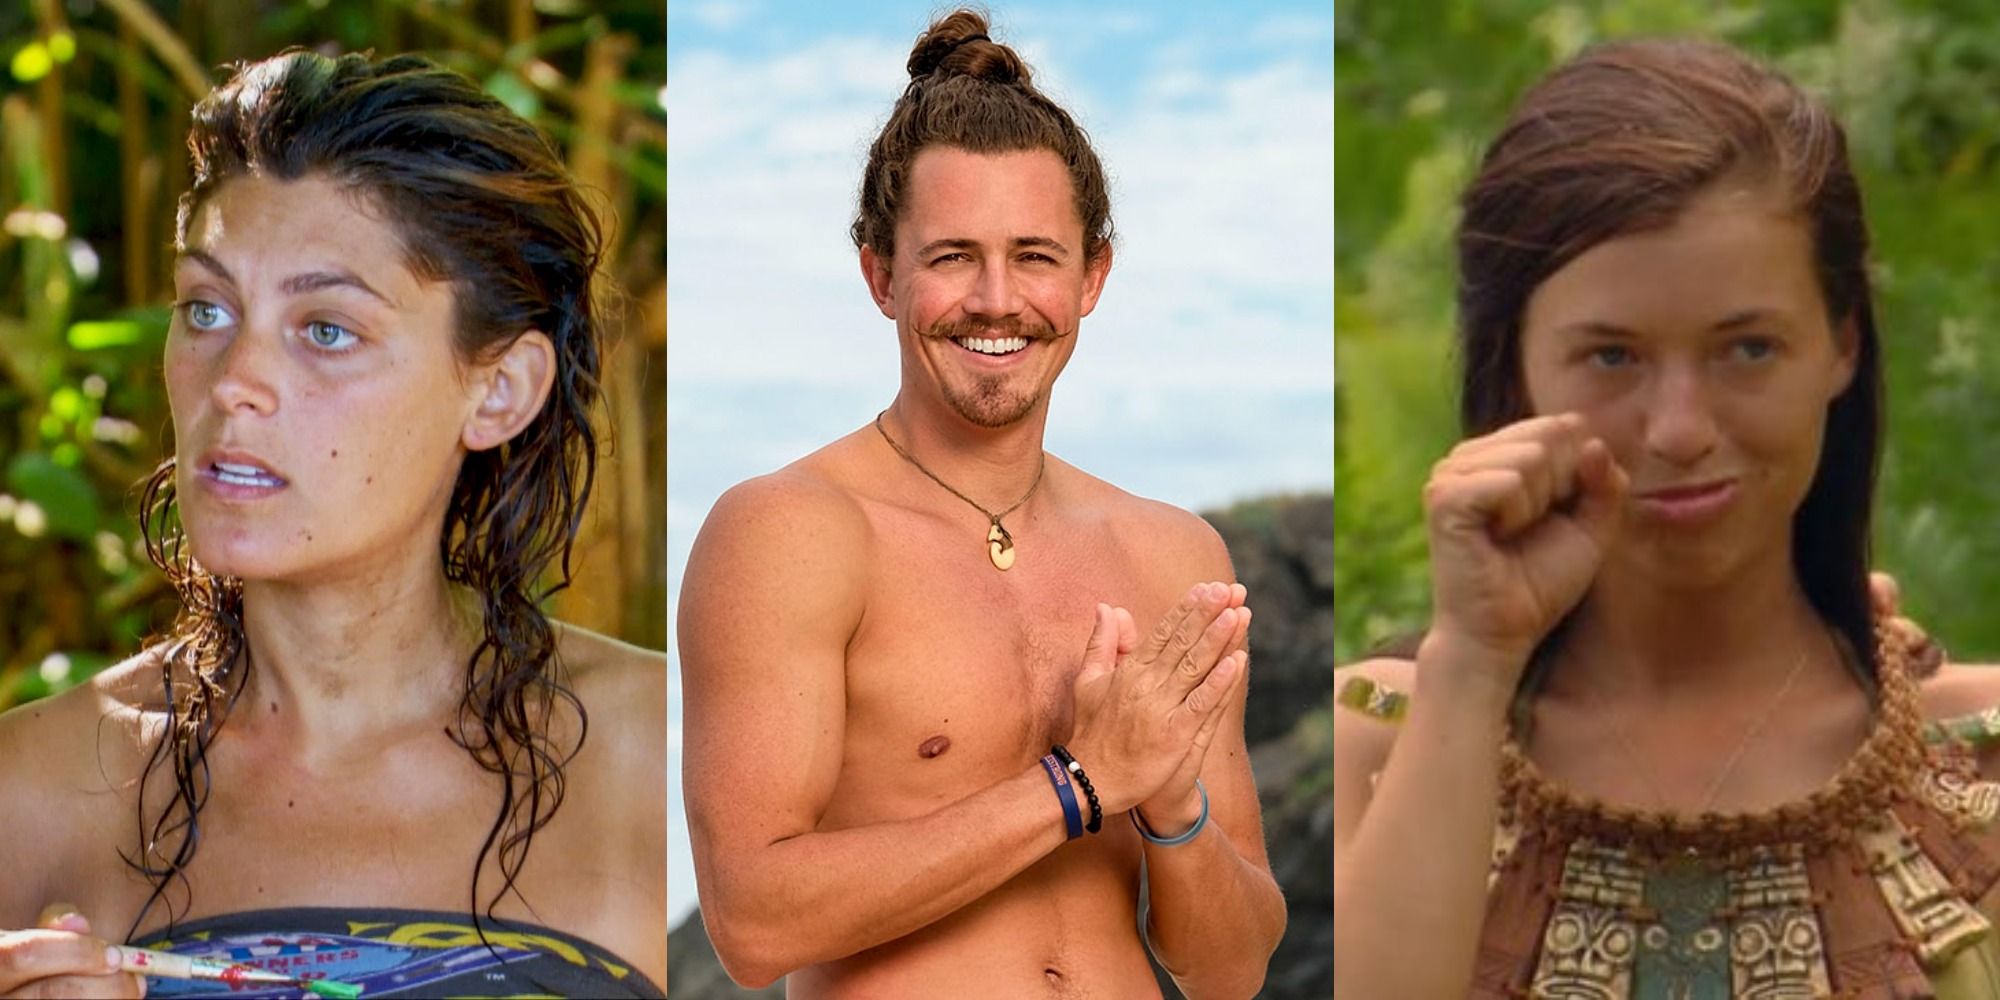 Three side by side images of Survivor contestants Parvati, Joe and Michelle Fitzgerald